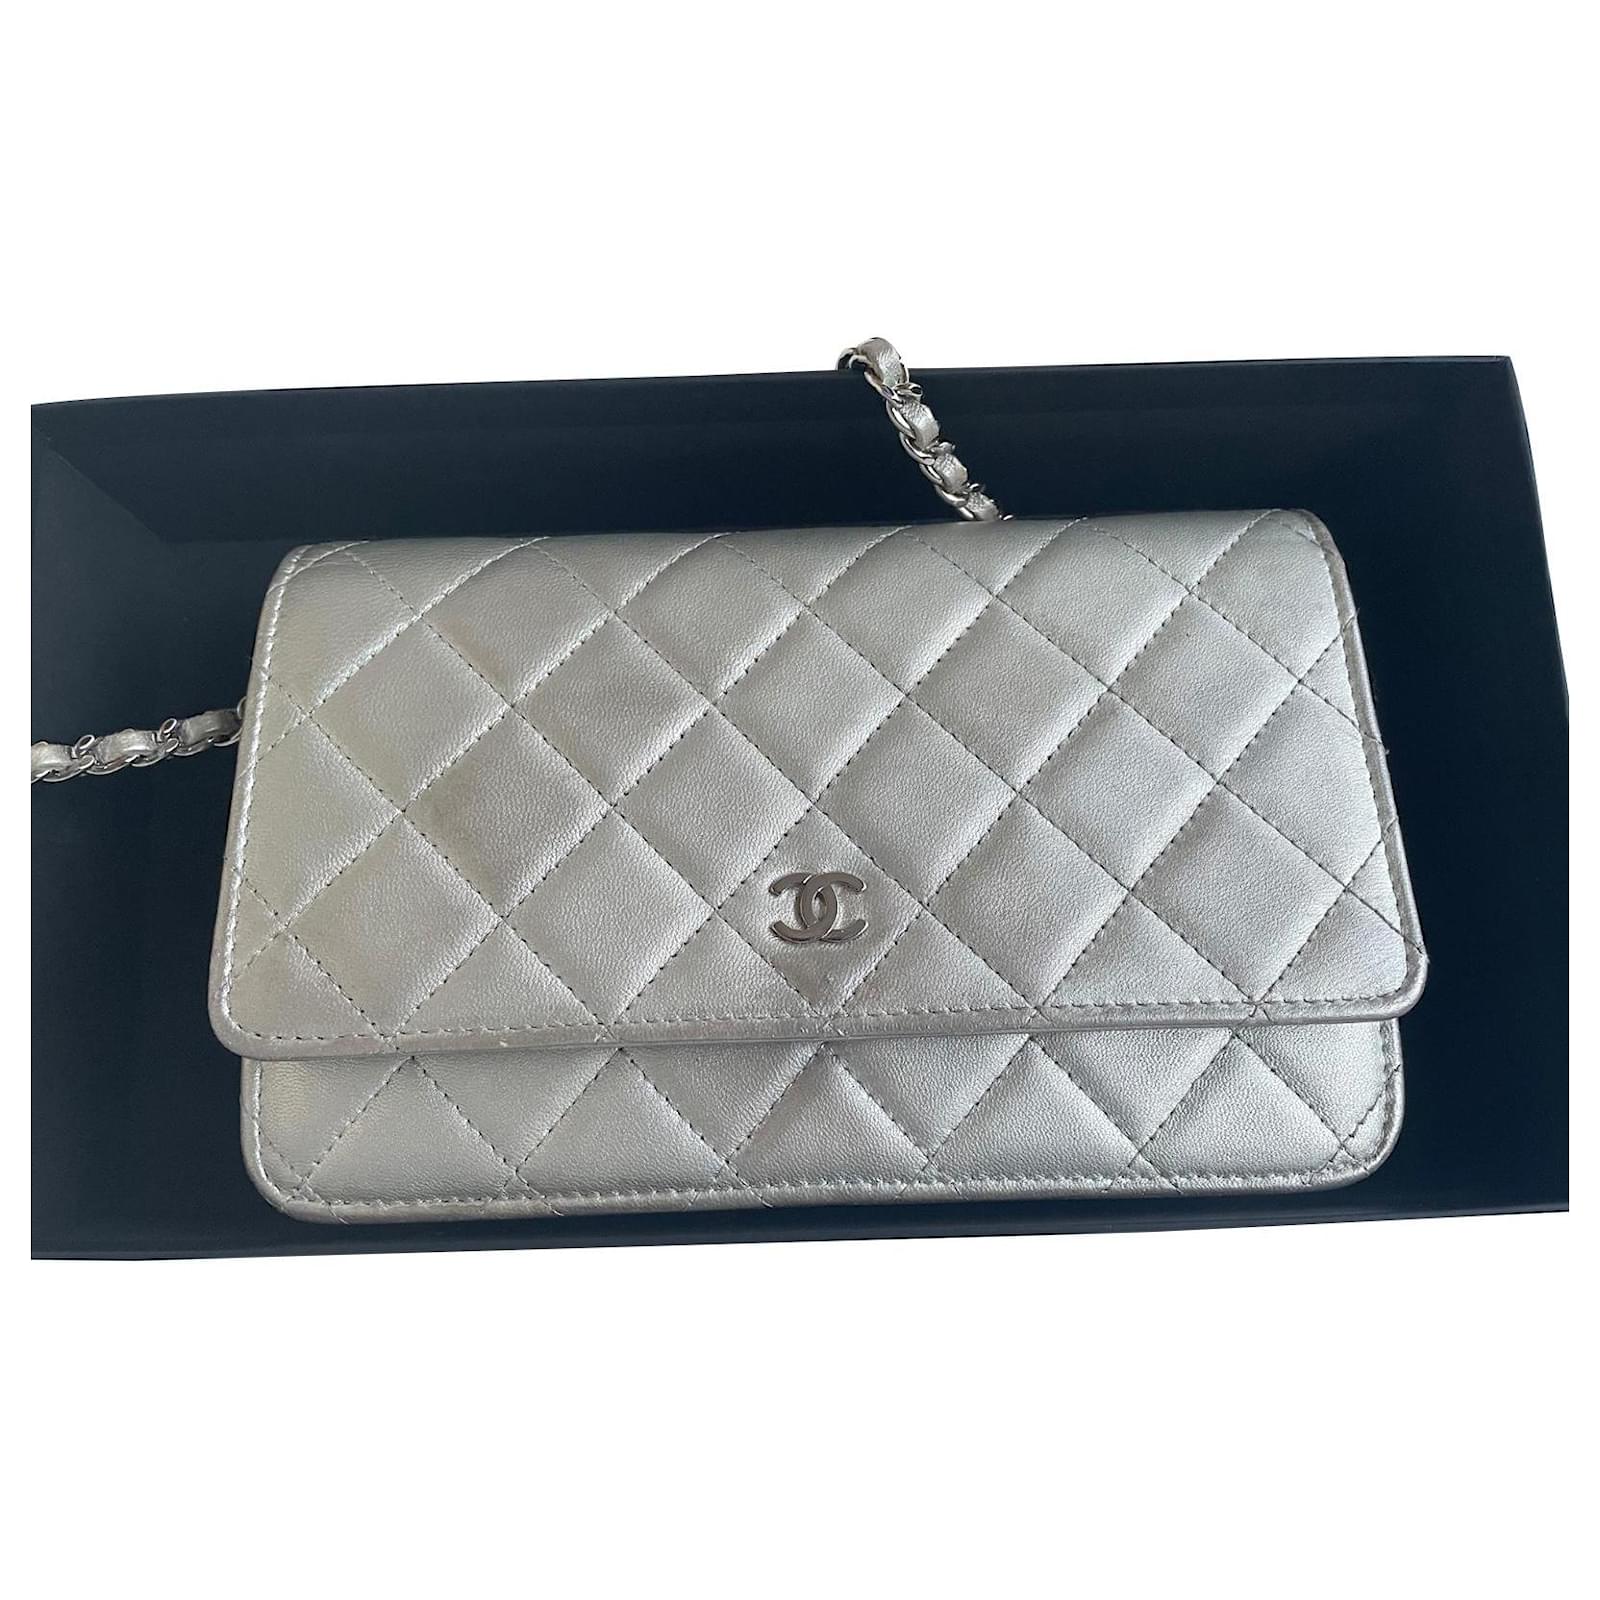 Chanel wallet on chain bag in metallic gray leather.